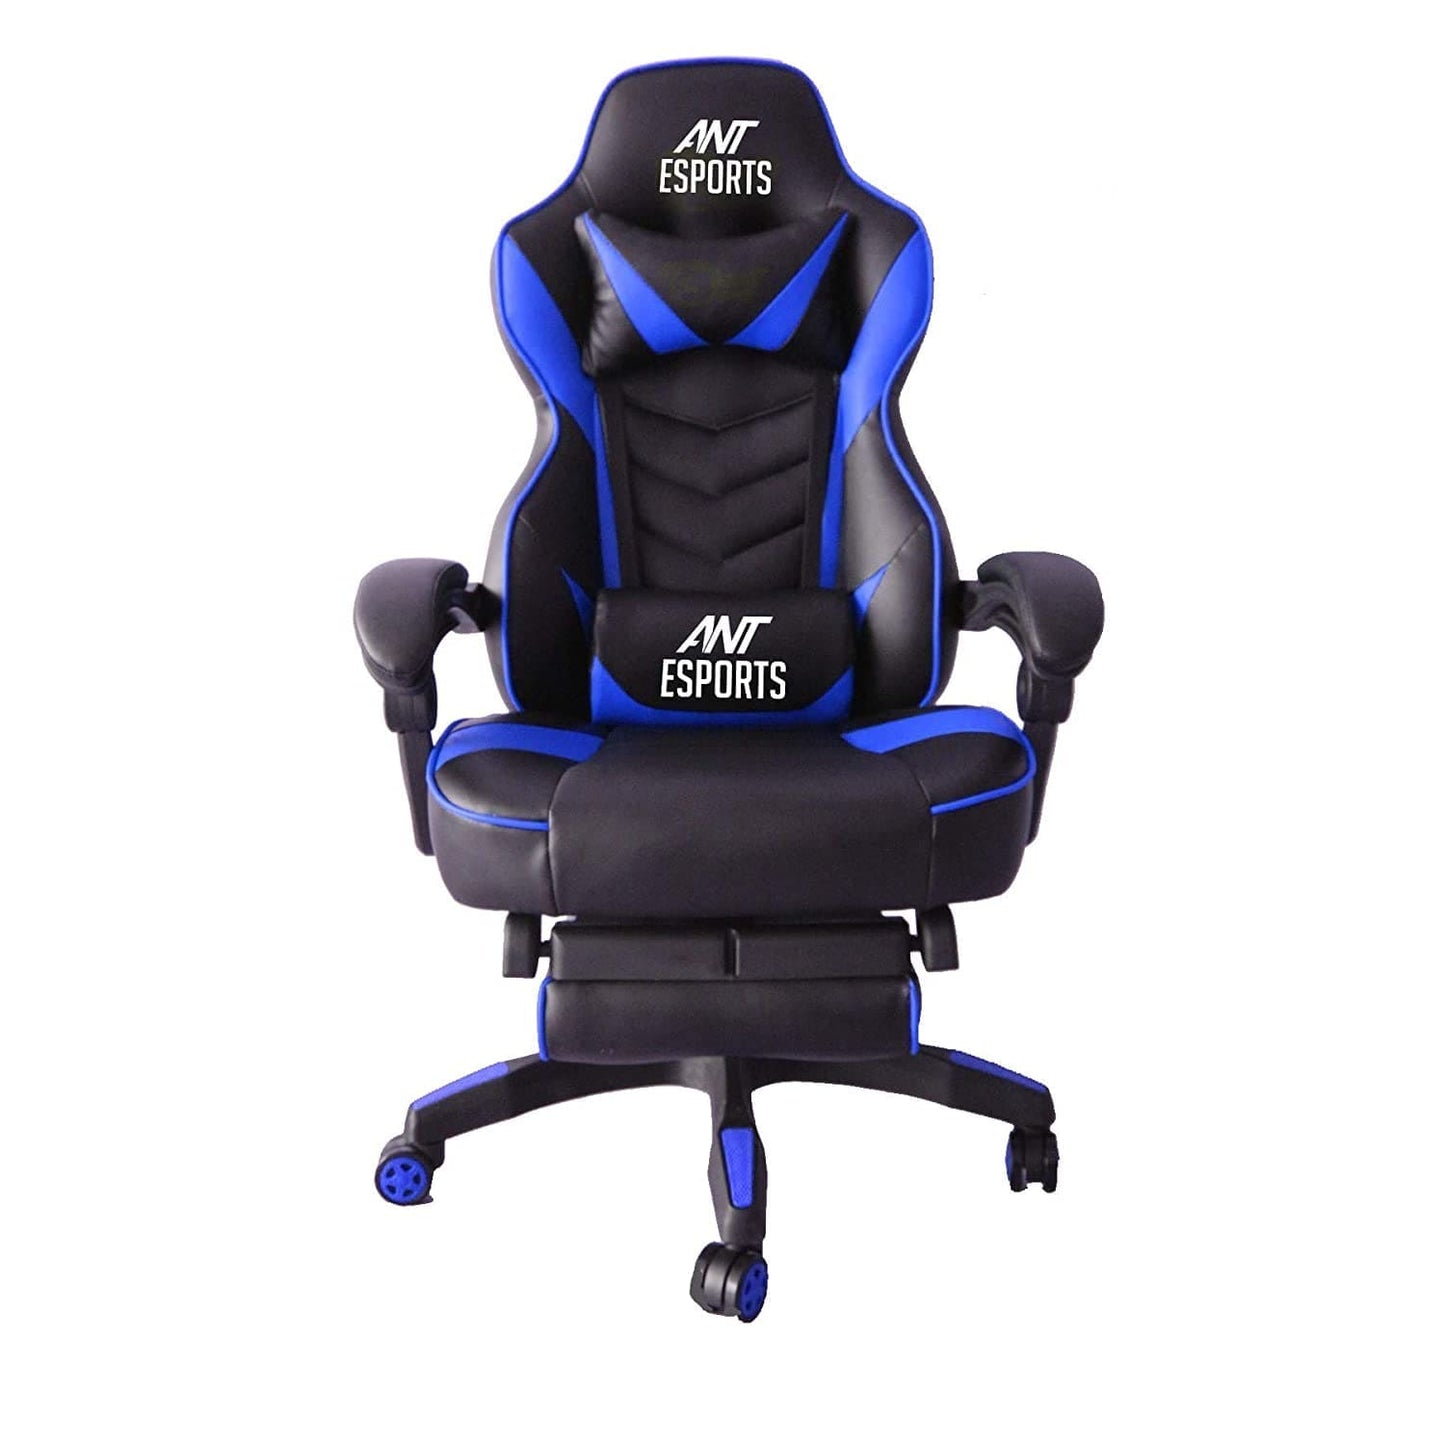 GAMING-CHAIR-ANT-ESPORTS-GAMEX-ROYALE-(BLUE-BLACK)